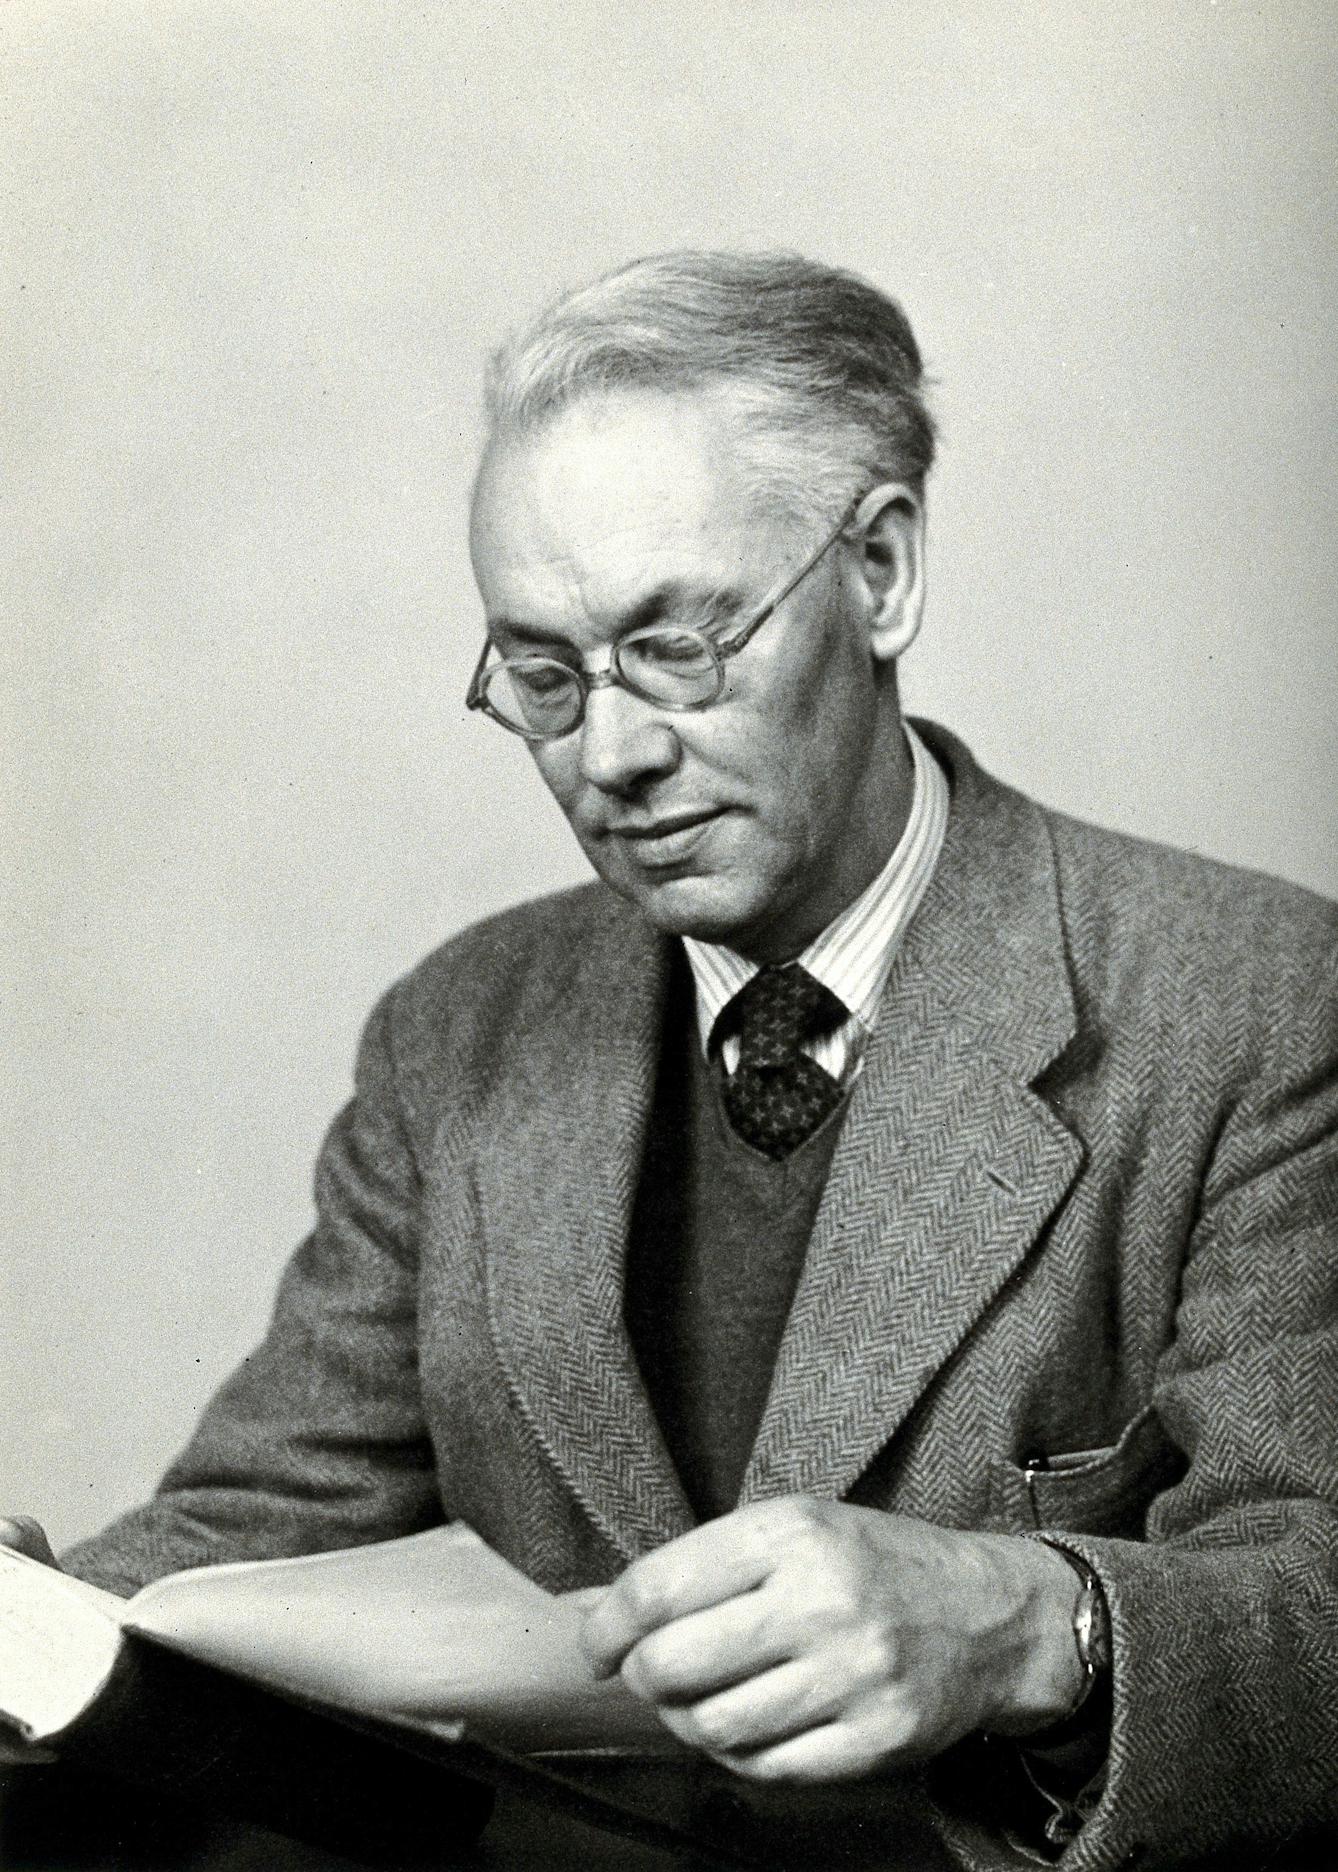 Black and white photograph of a middle-aged white man, Sir Christopher Howard Andrewes, wearing glasses and a tweed suit who is reading a book. 